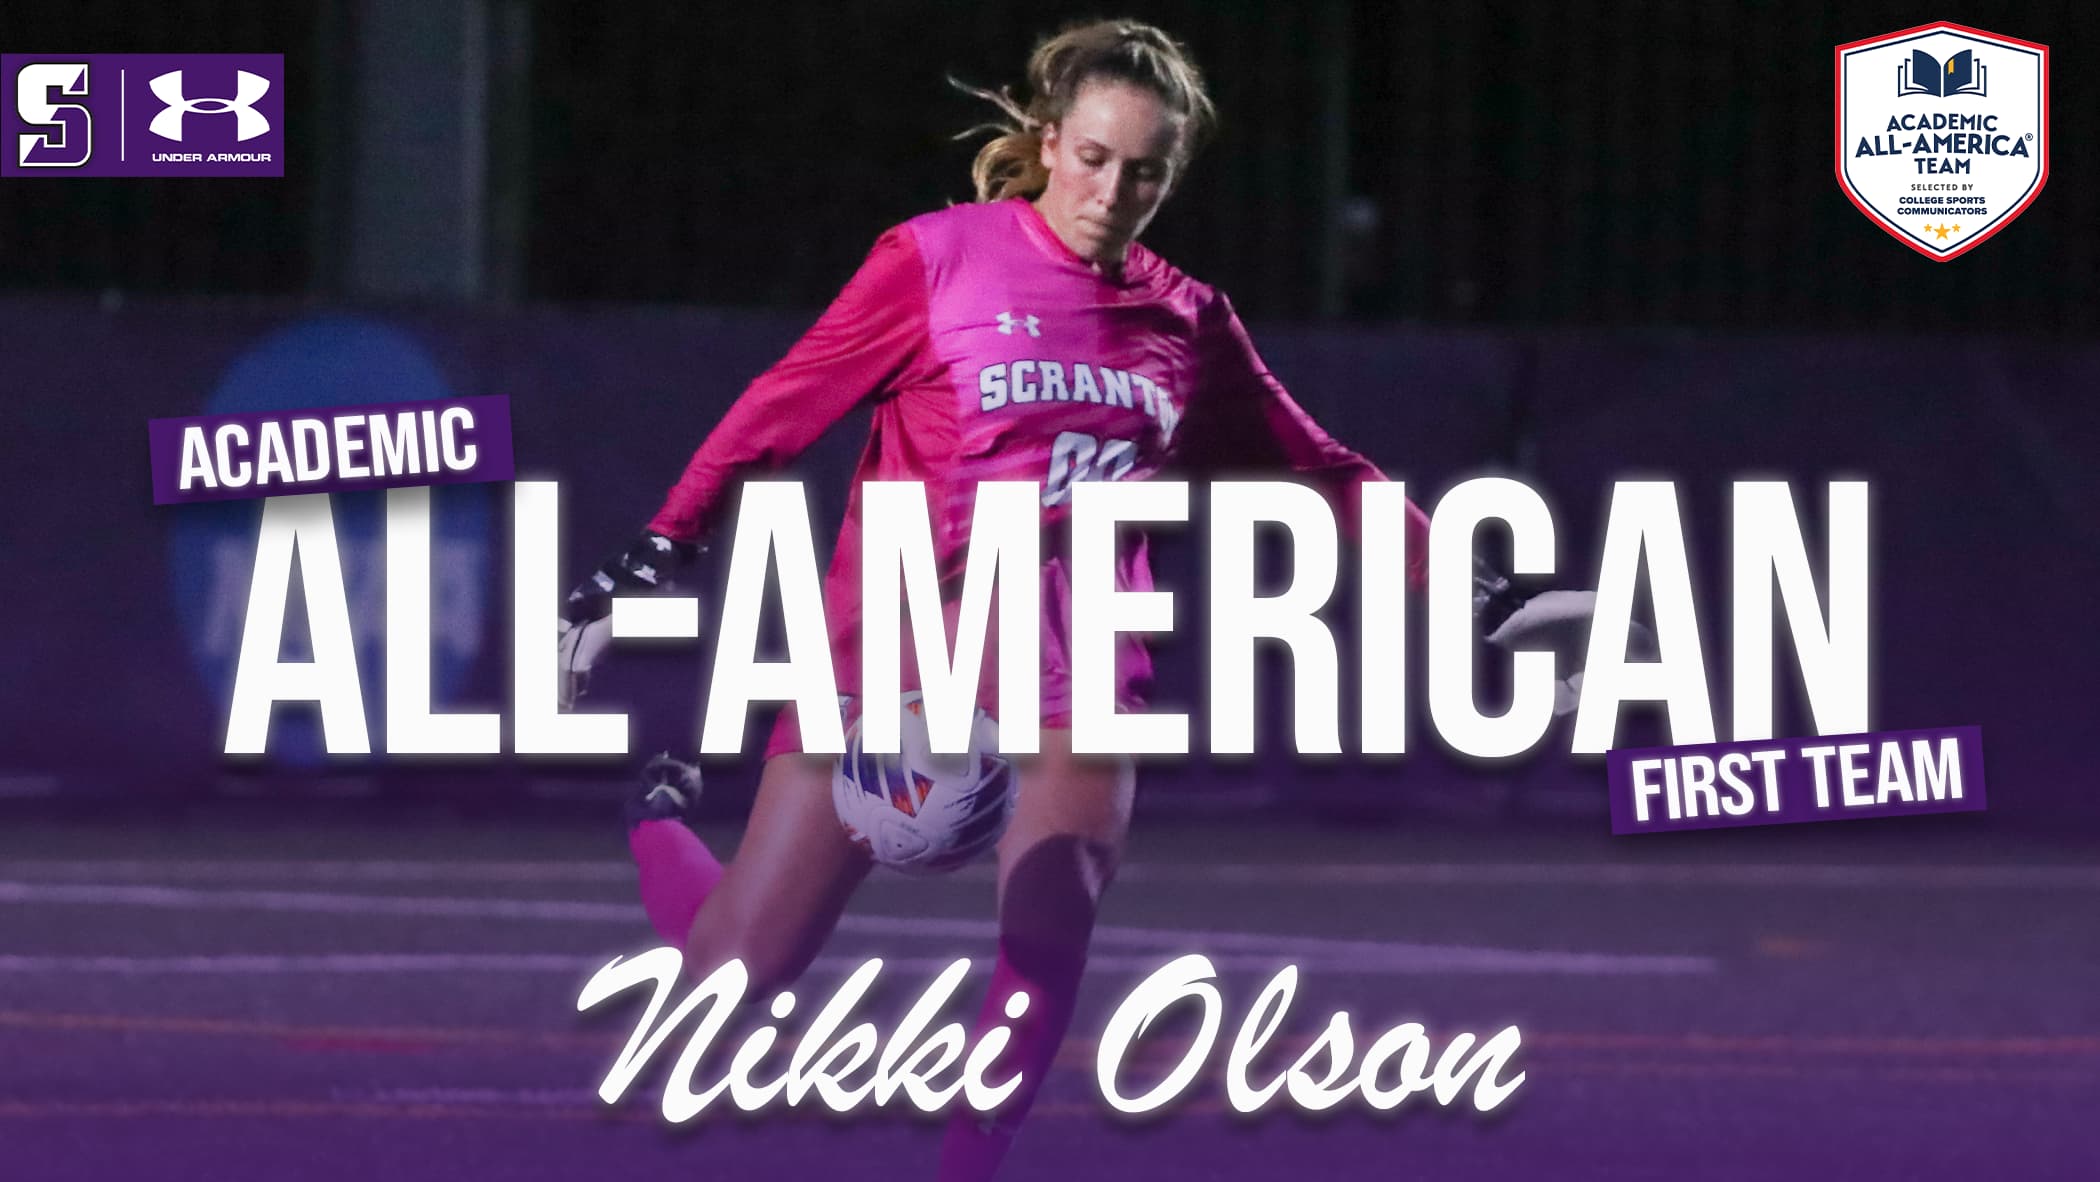 Sophomore goalie Nicole Olson, shown, of The University of Scranton women's soccer team, earned College Sports Communicators (CSC) Academic All-American First Team honors.